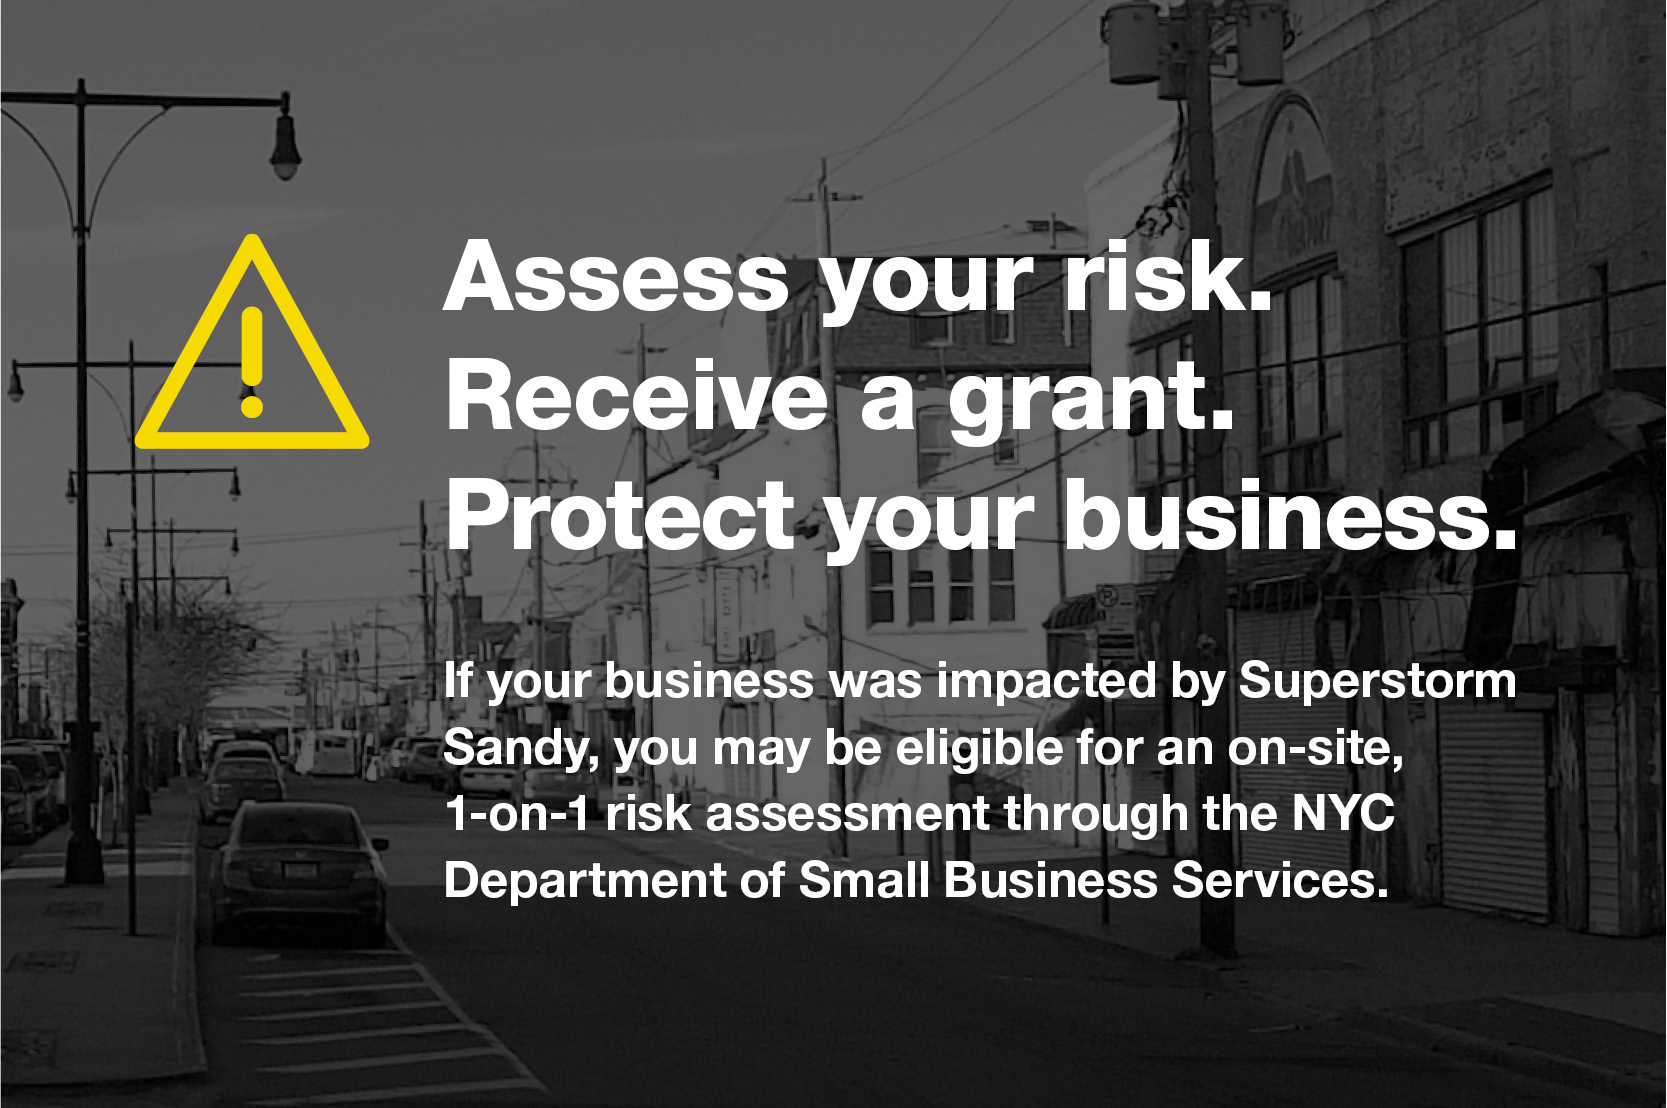 Assess your risk. Receive a grant. Protect your business.